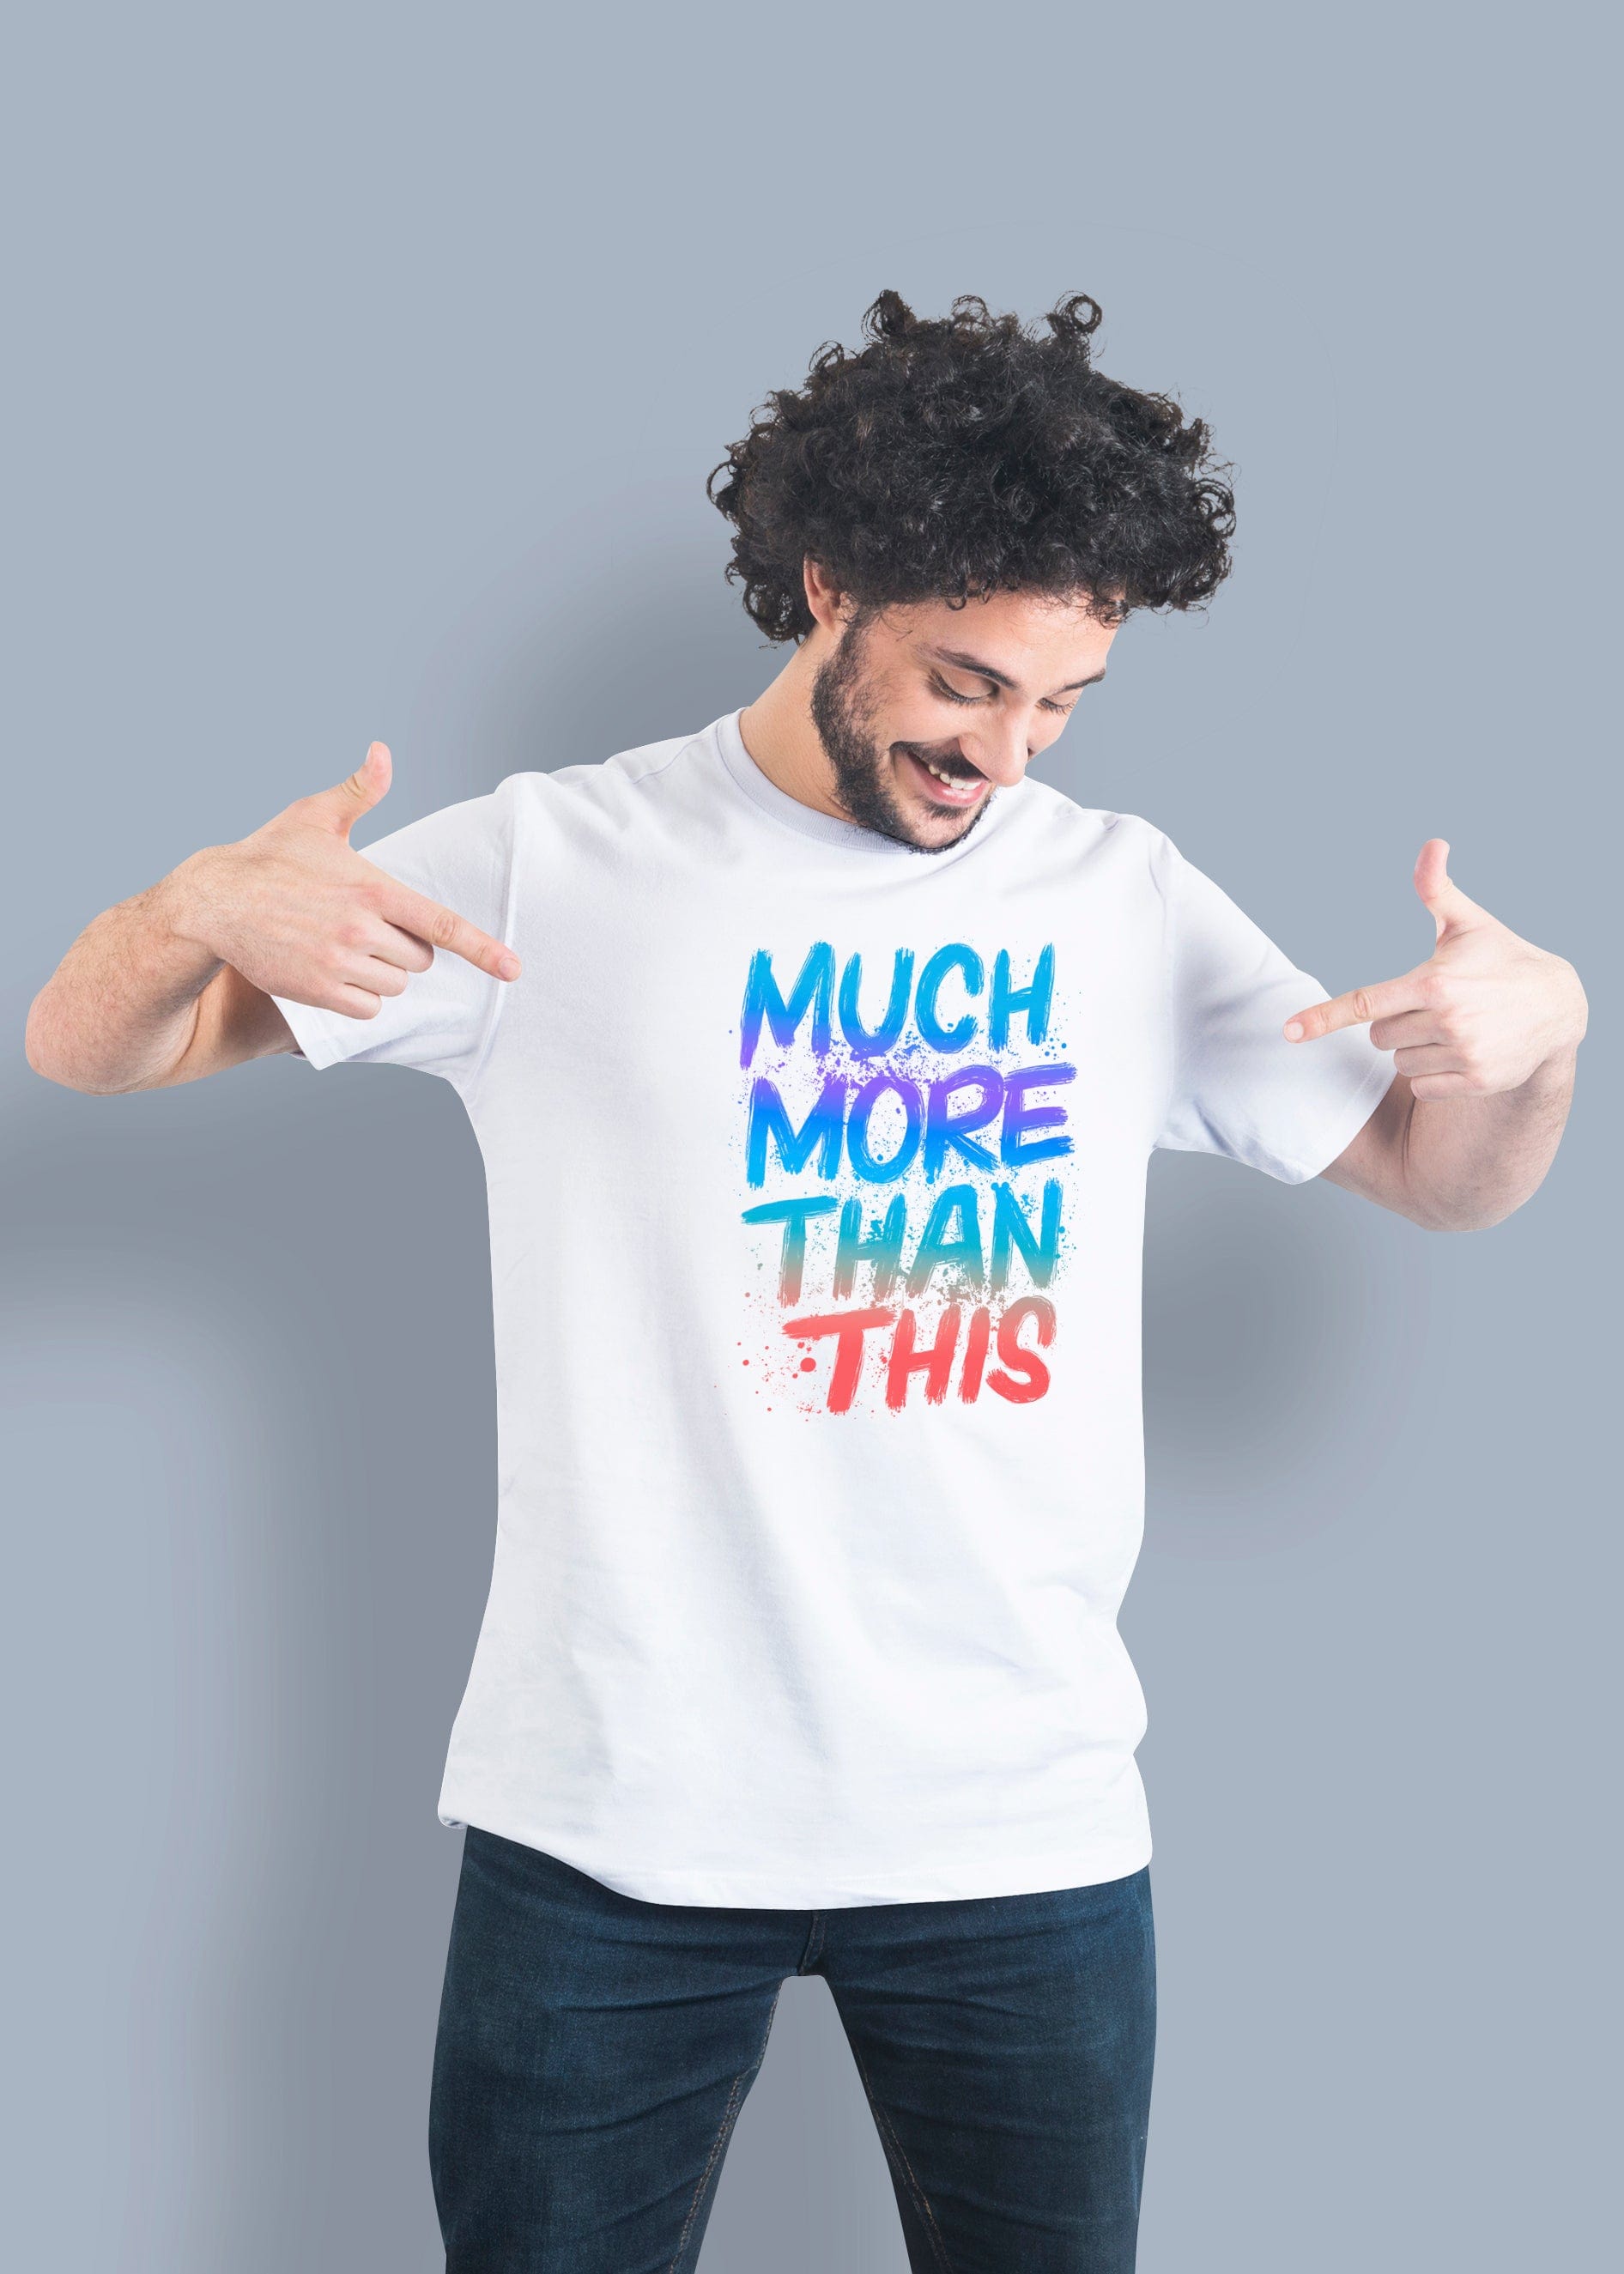 Much More Than This Printed Half Sleeve Premium Cotton T-shirt For Men